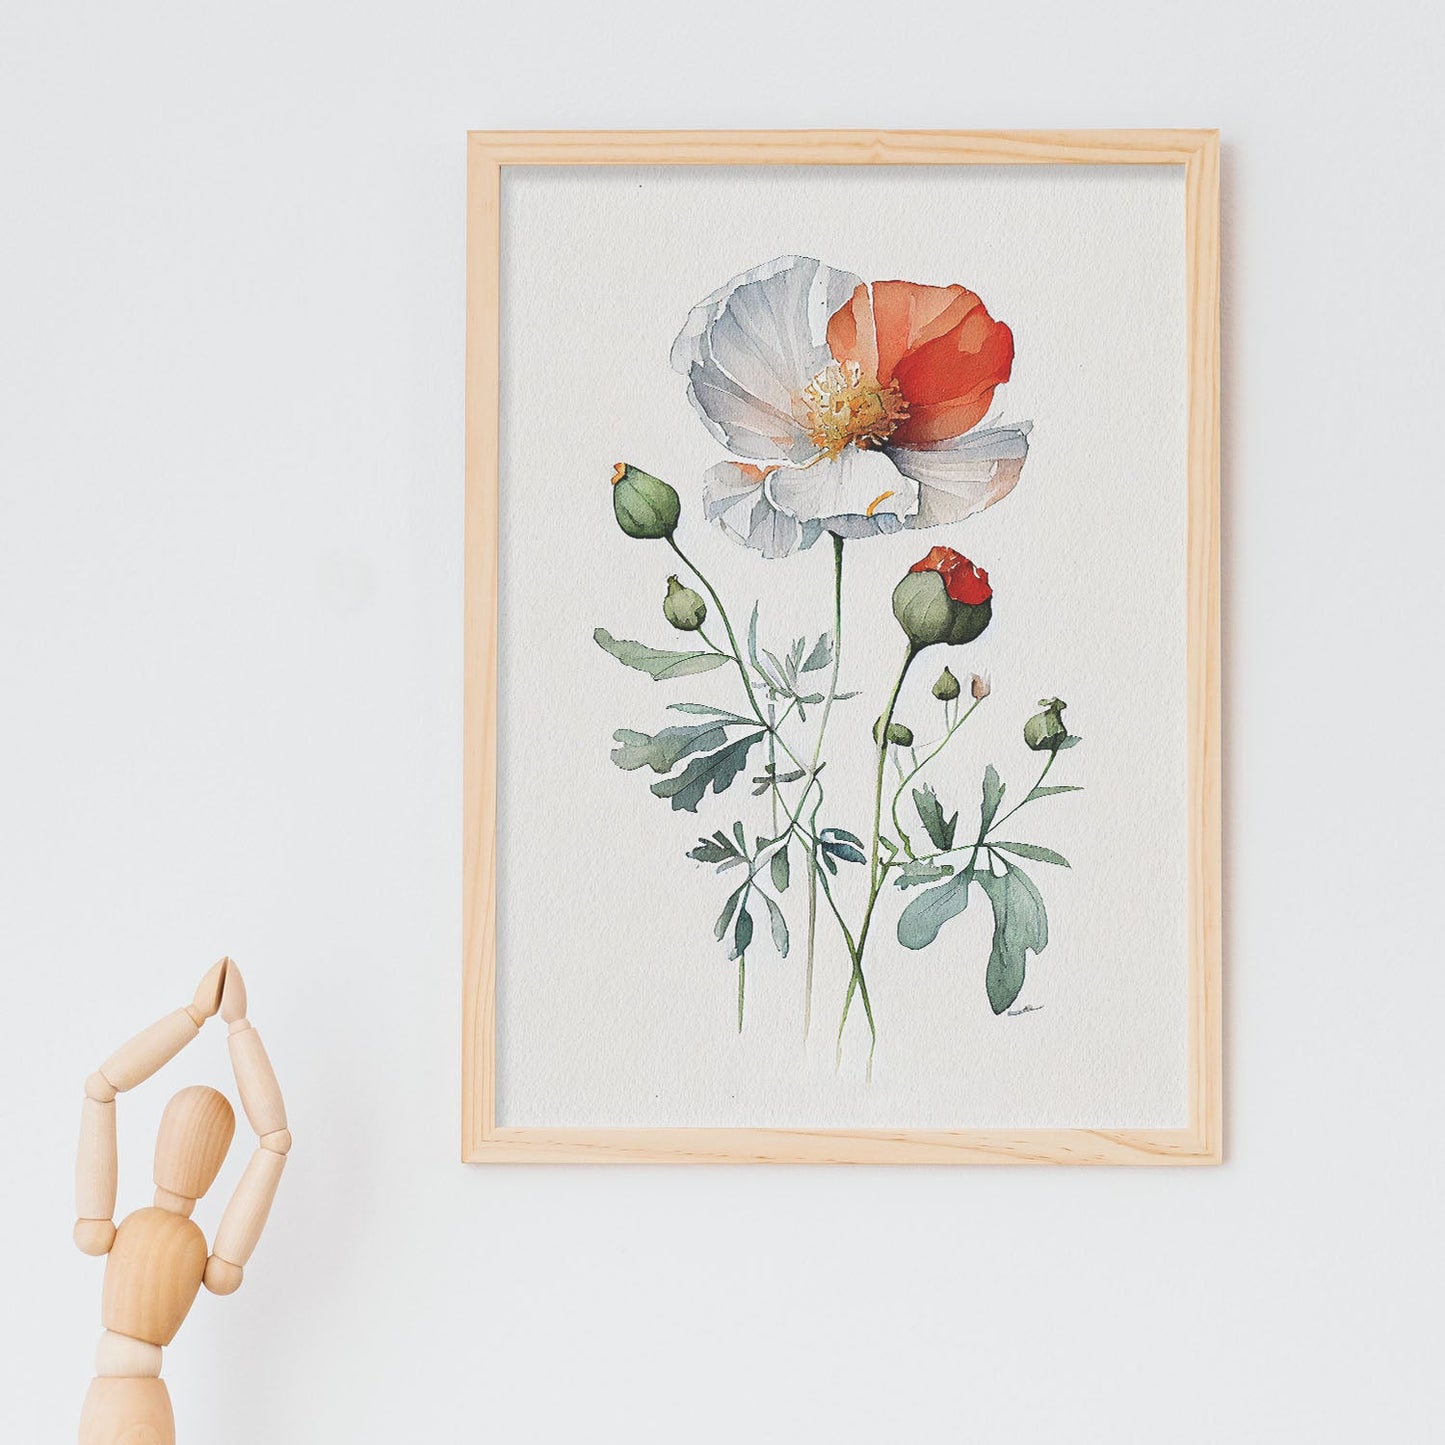 Nacnic watercolor minmal Poppy_2. Aesthetic Wall Art Prints for Bedroom or Living Room Design.